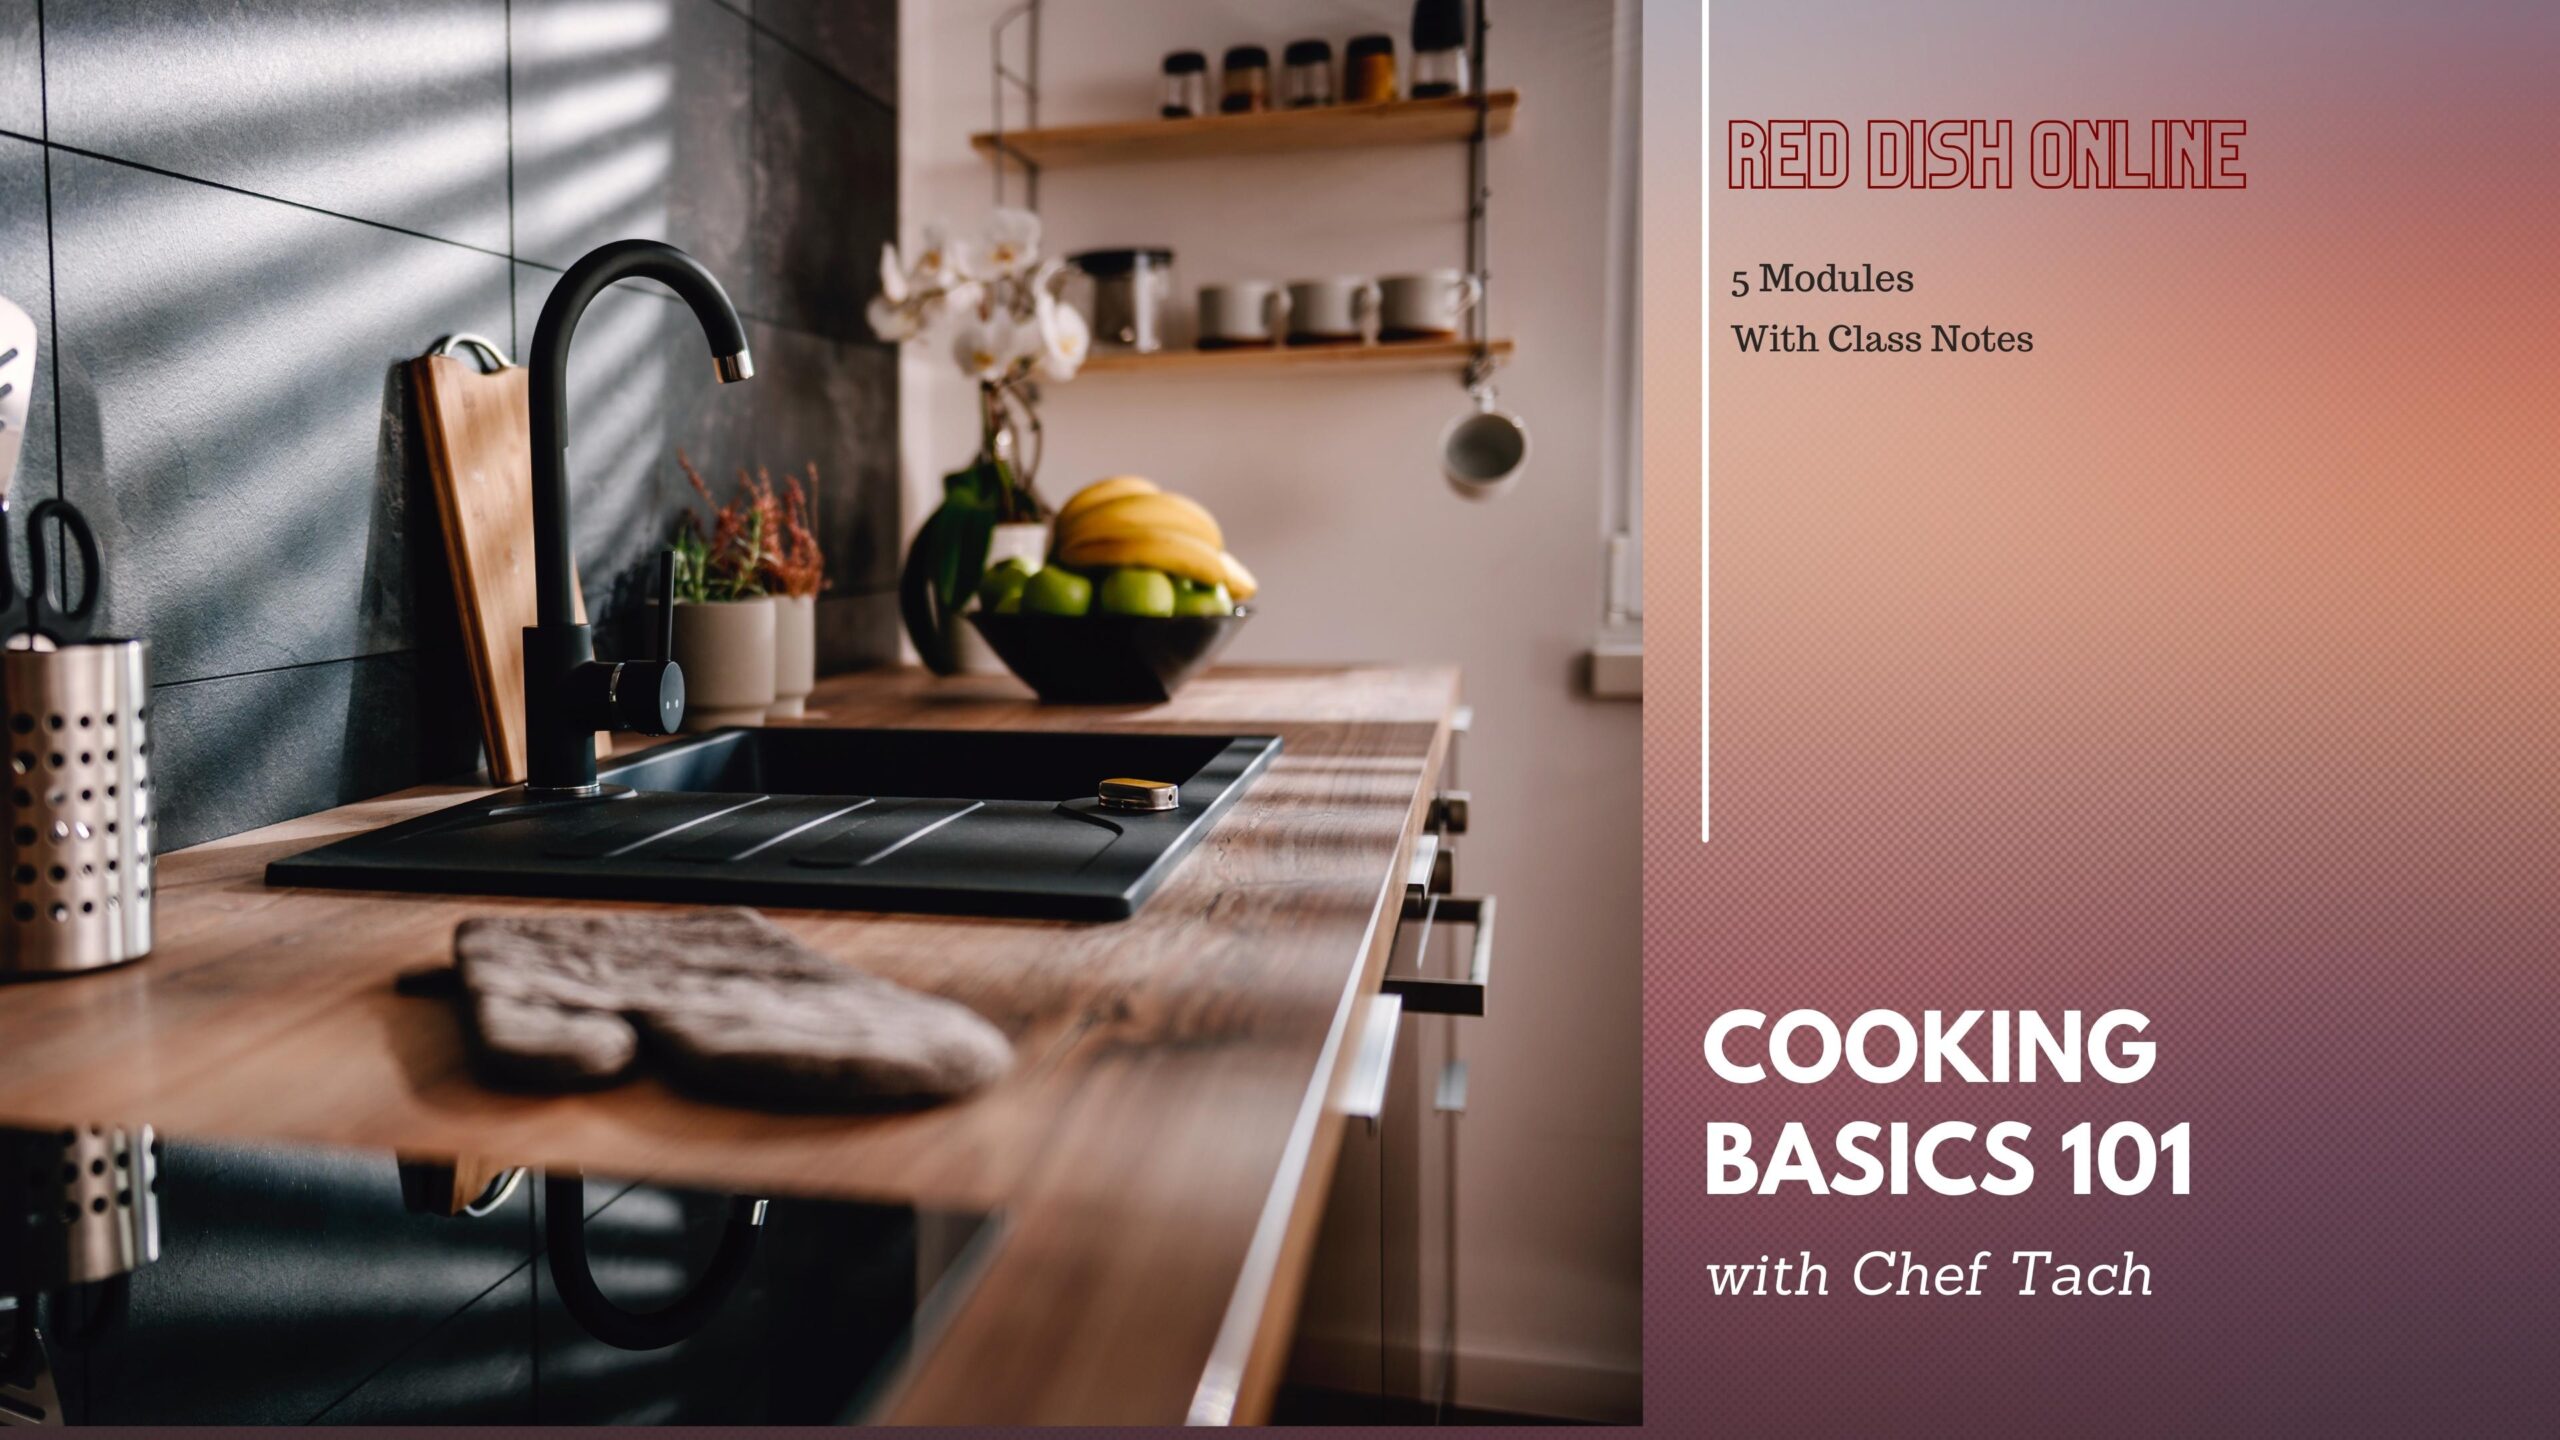 Kitchen Organisation and Fundamentals of Cooking